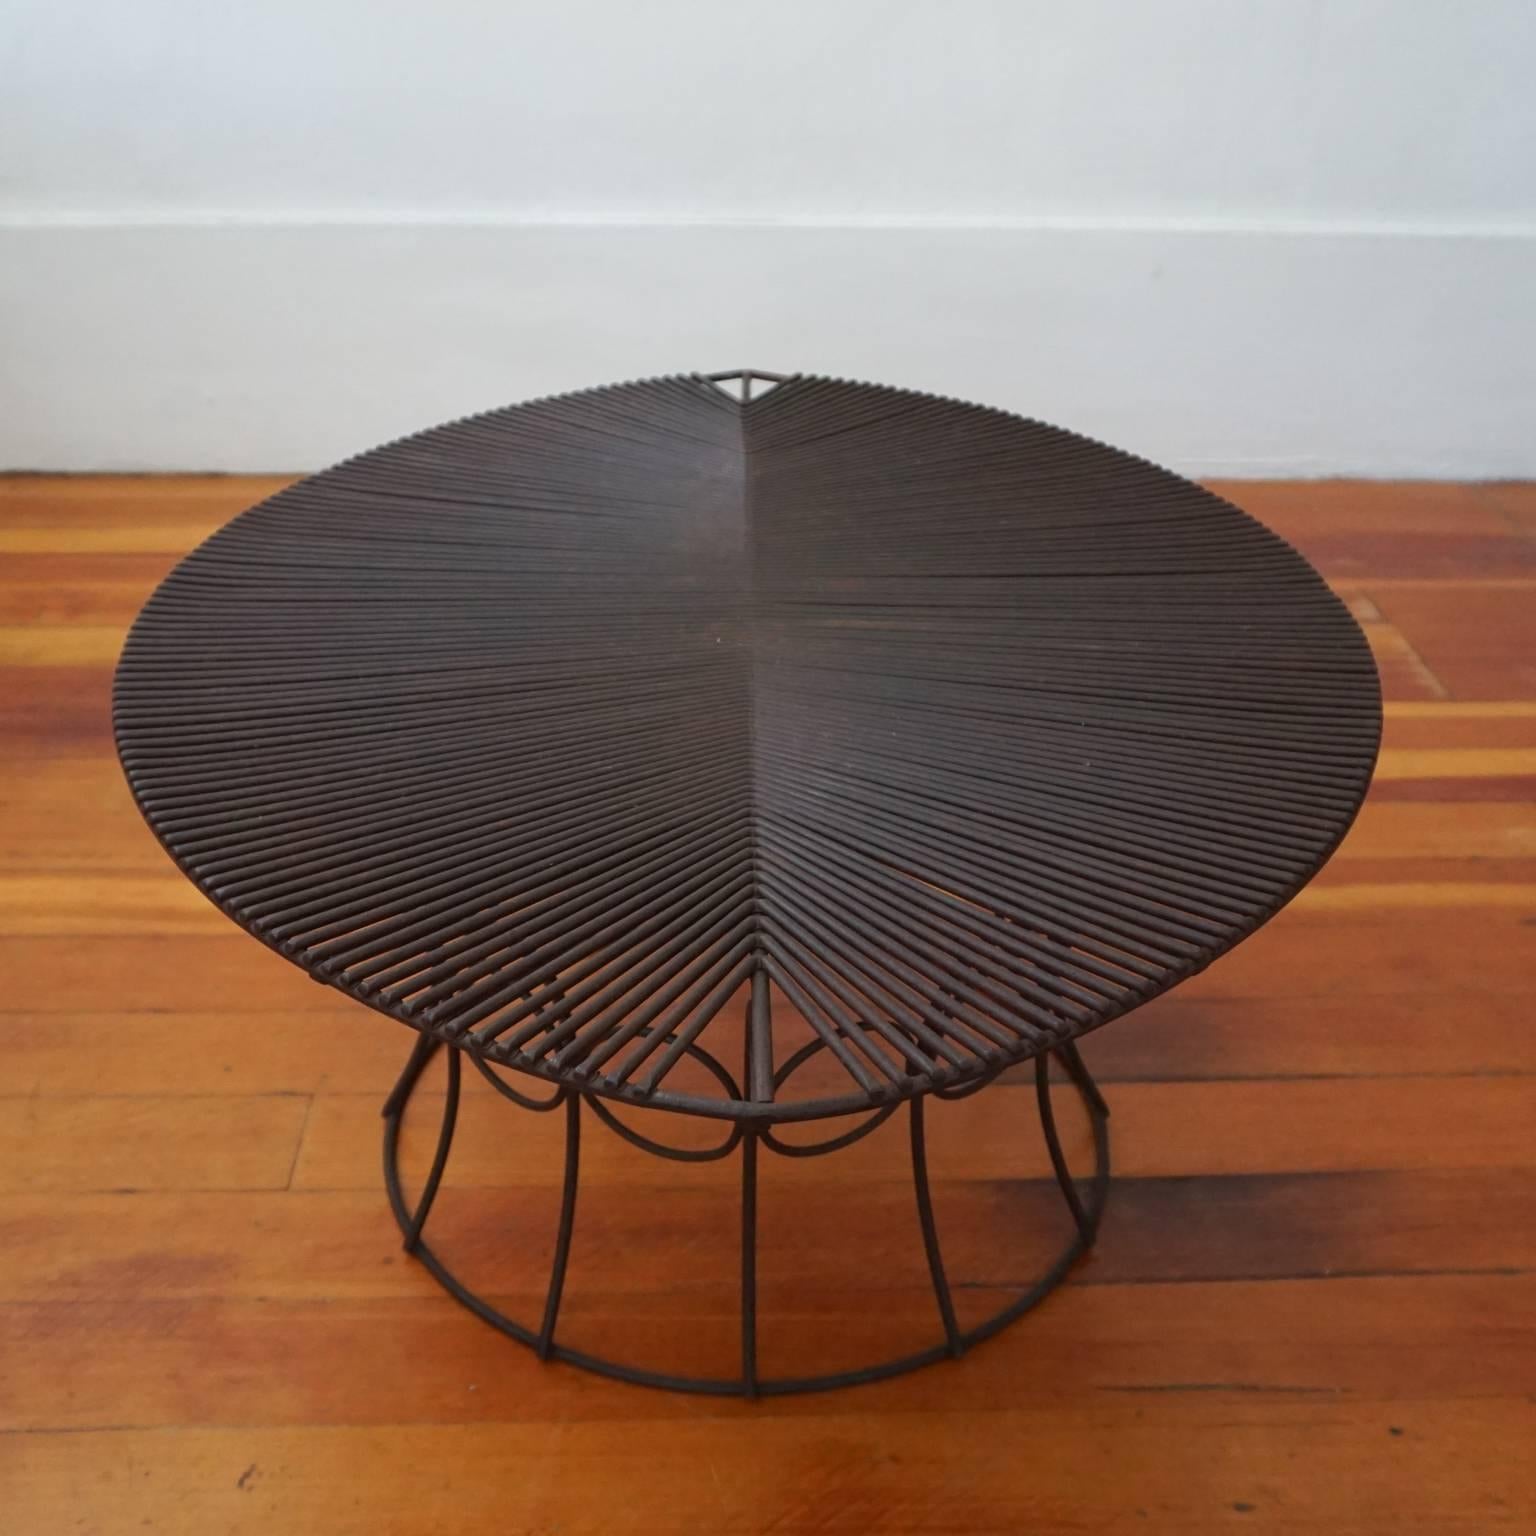 Leaf table by New England sculptor John Risley, 1950s.

Risley was a multidisciplinary artist and designer who studied sculpture at Cranbrook Academy of Art in the early 1950s.